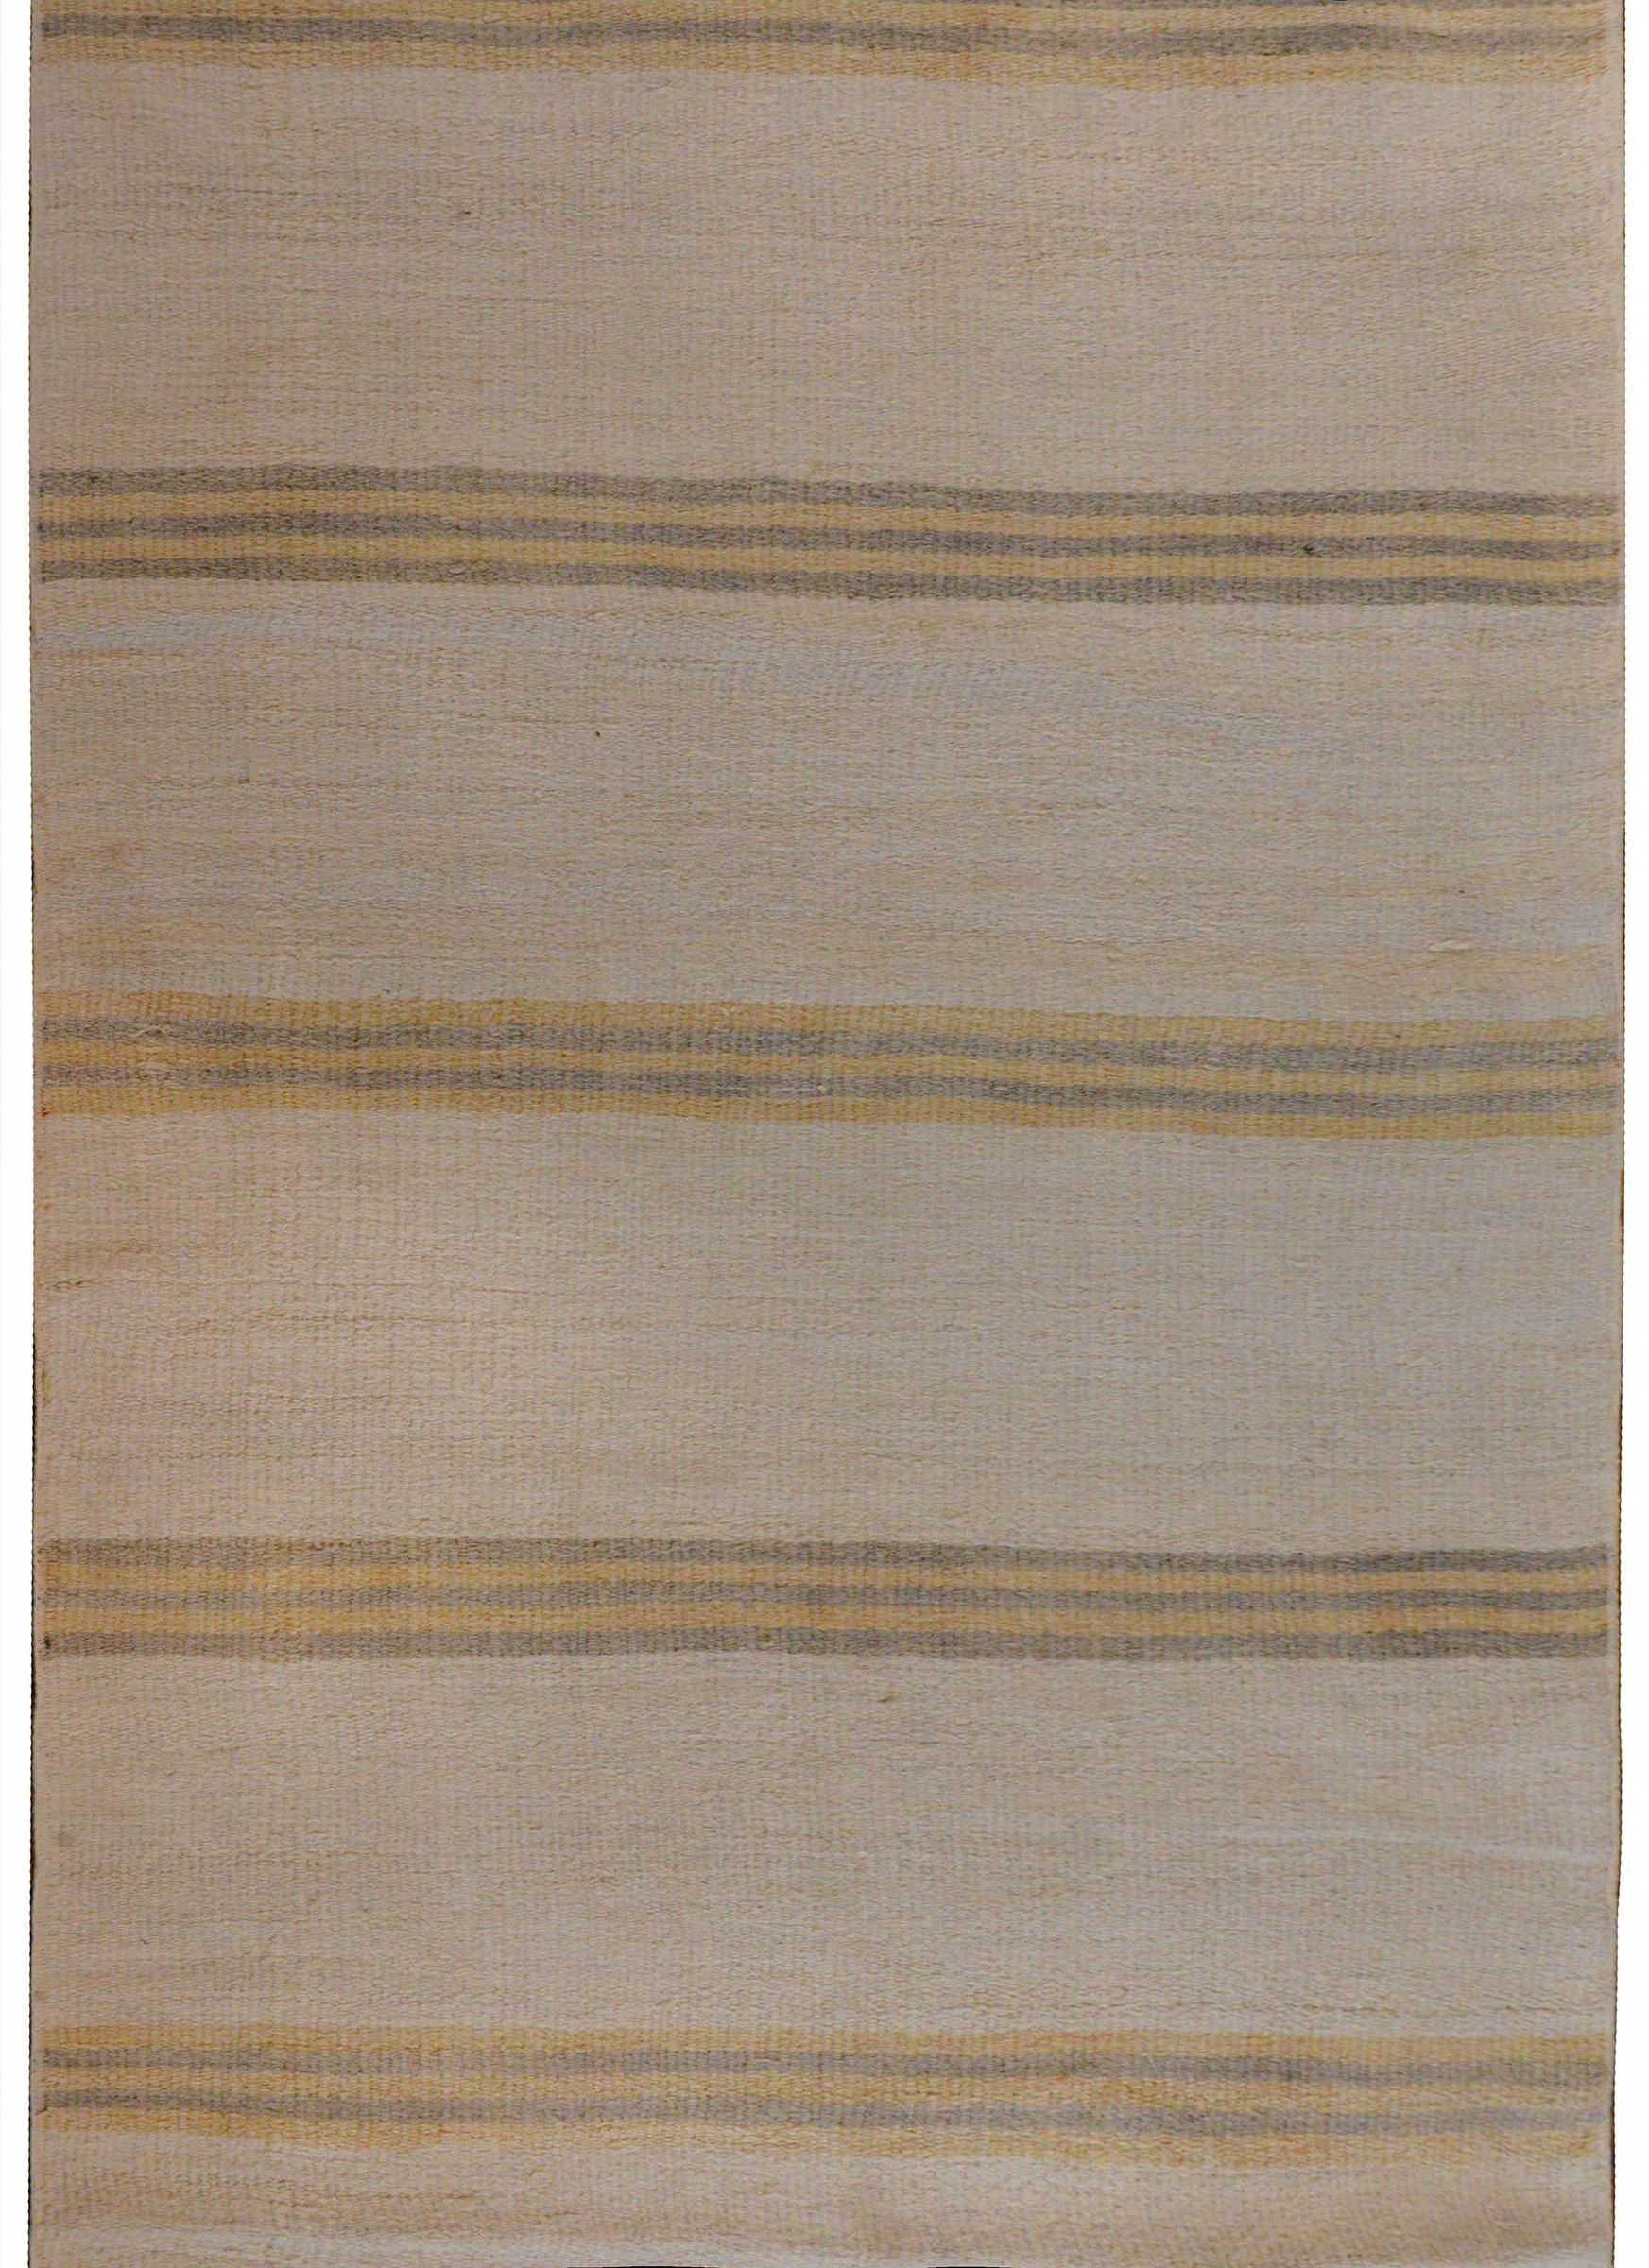 A striking vintage mid-20th century Turkish Konya Kilim runner with a gold and gray striped pattern on a cream colored background.